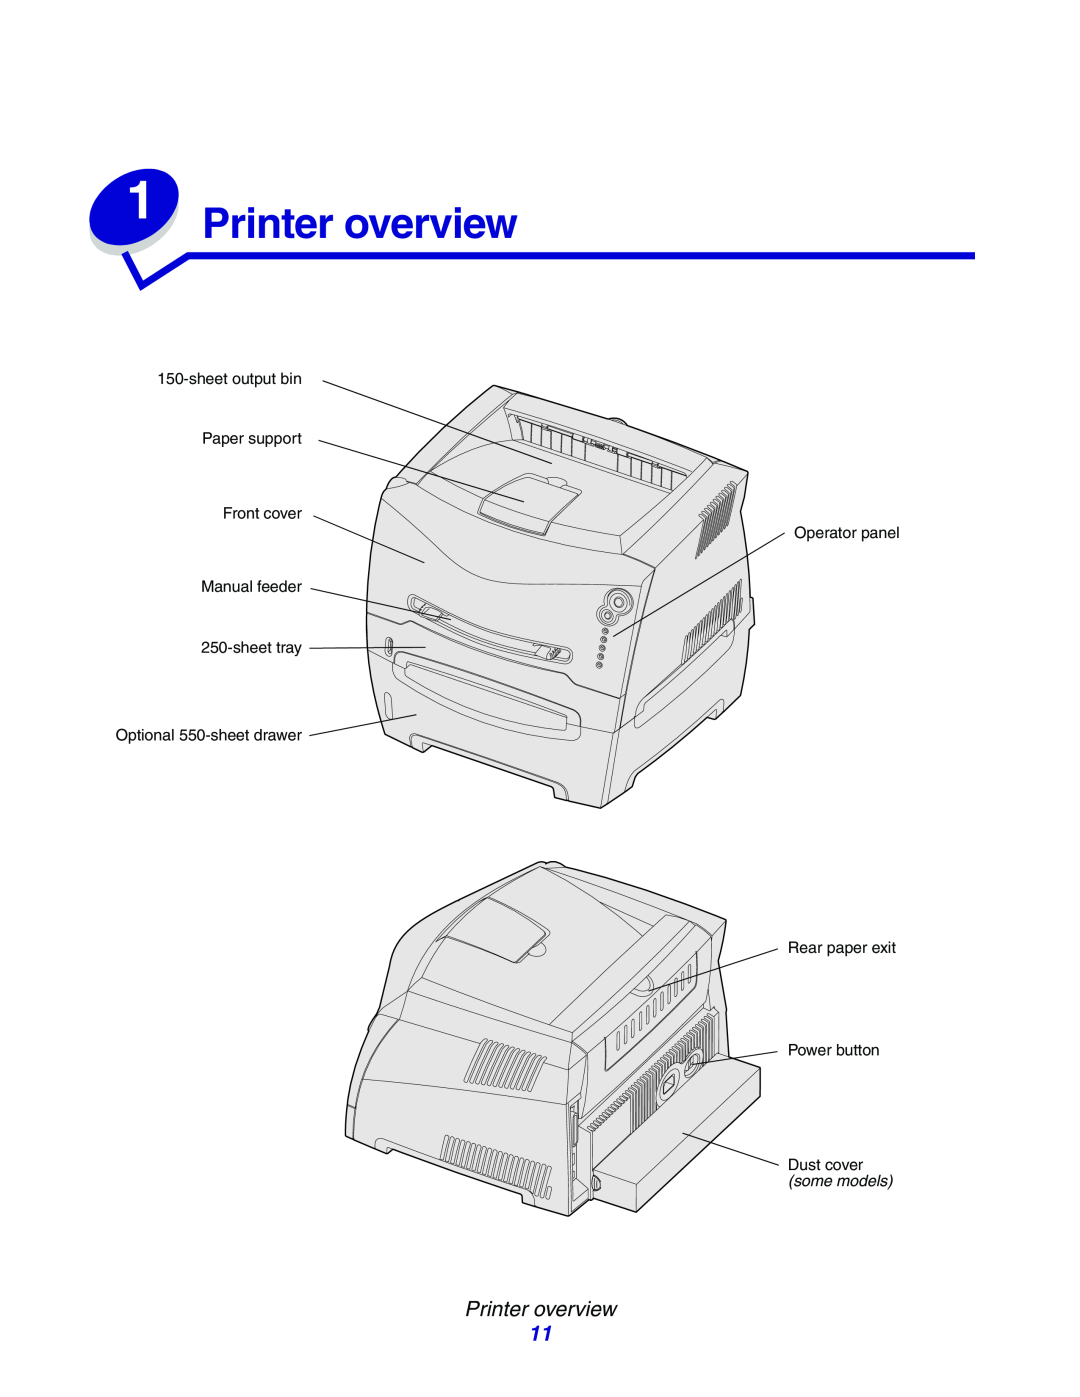 Lexmark E234 manual Printer overview, sheetoutput bin Paper support Front cover, Operator panel Manual feeder 250-sheettray 